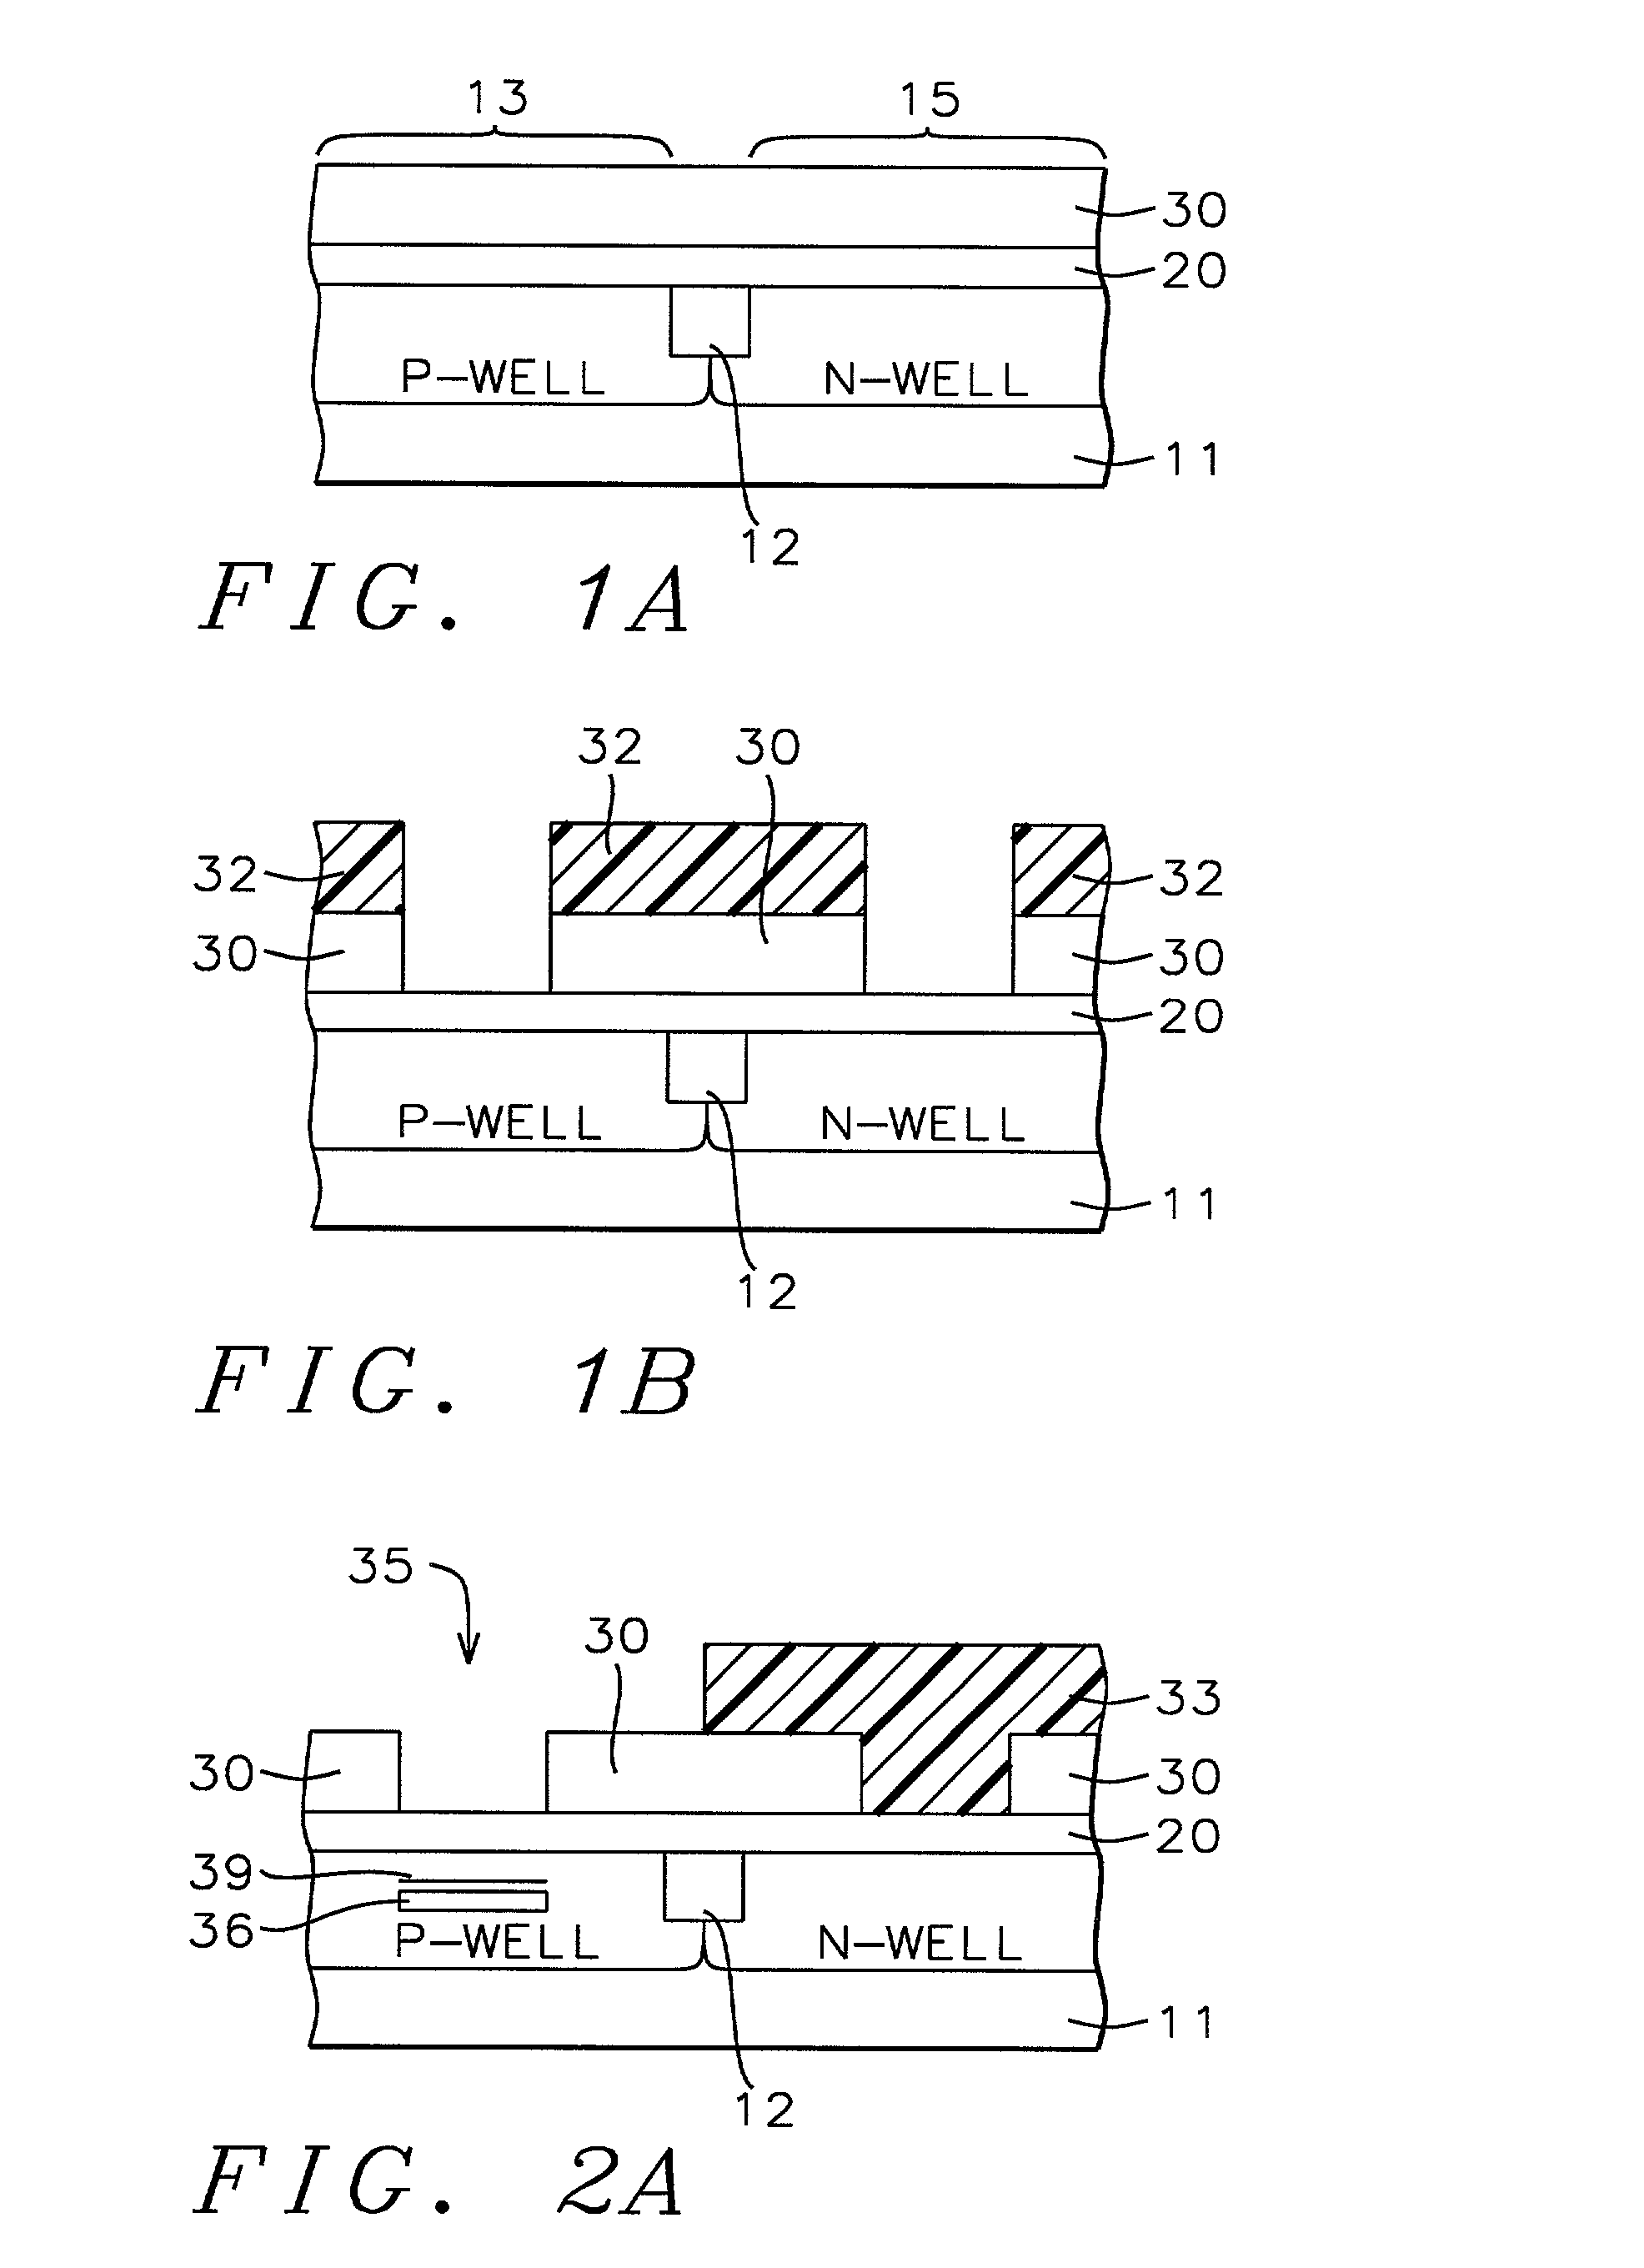 Method for forming self-aligned channel implants using a gate poly reverse mask